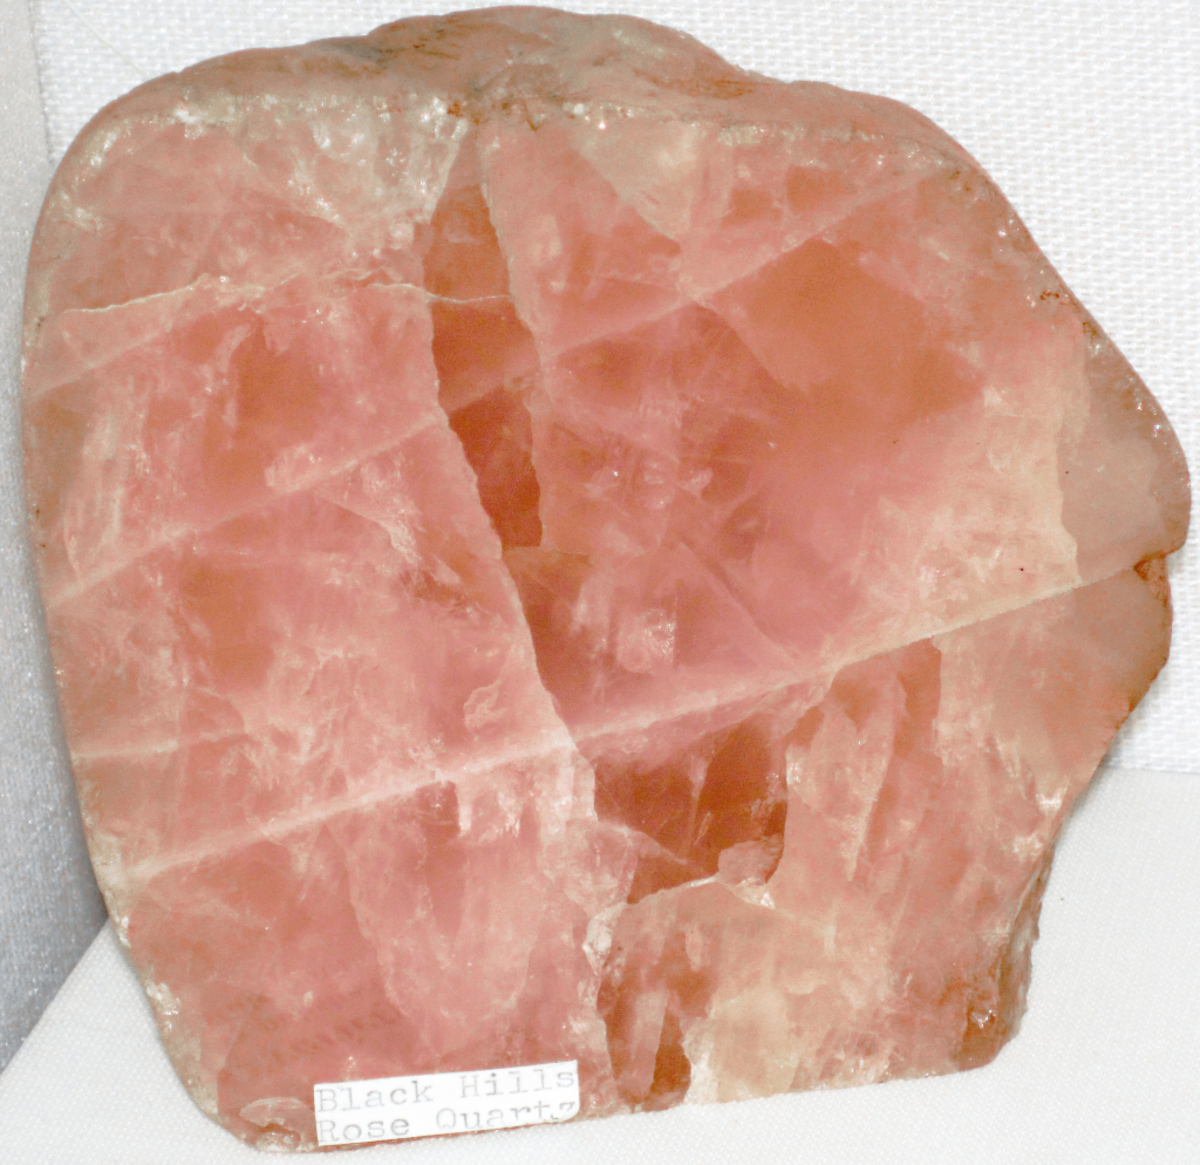 Rose quartz crystals or gem essense can help to soothe burns and blisters. 